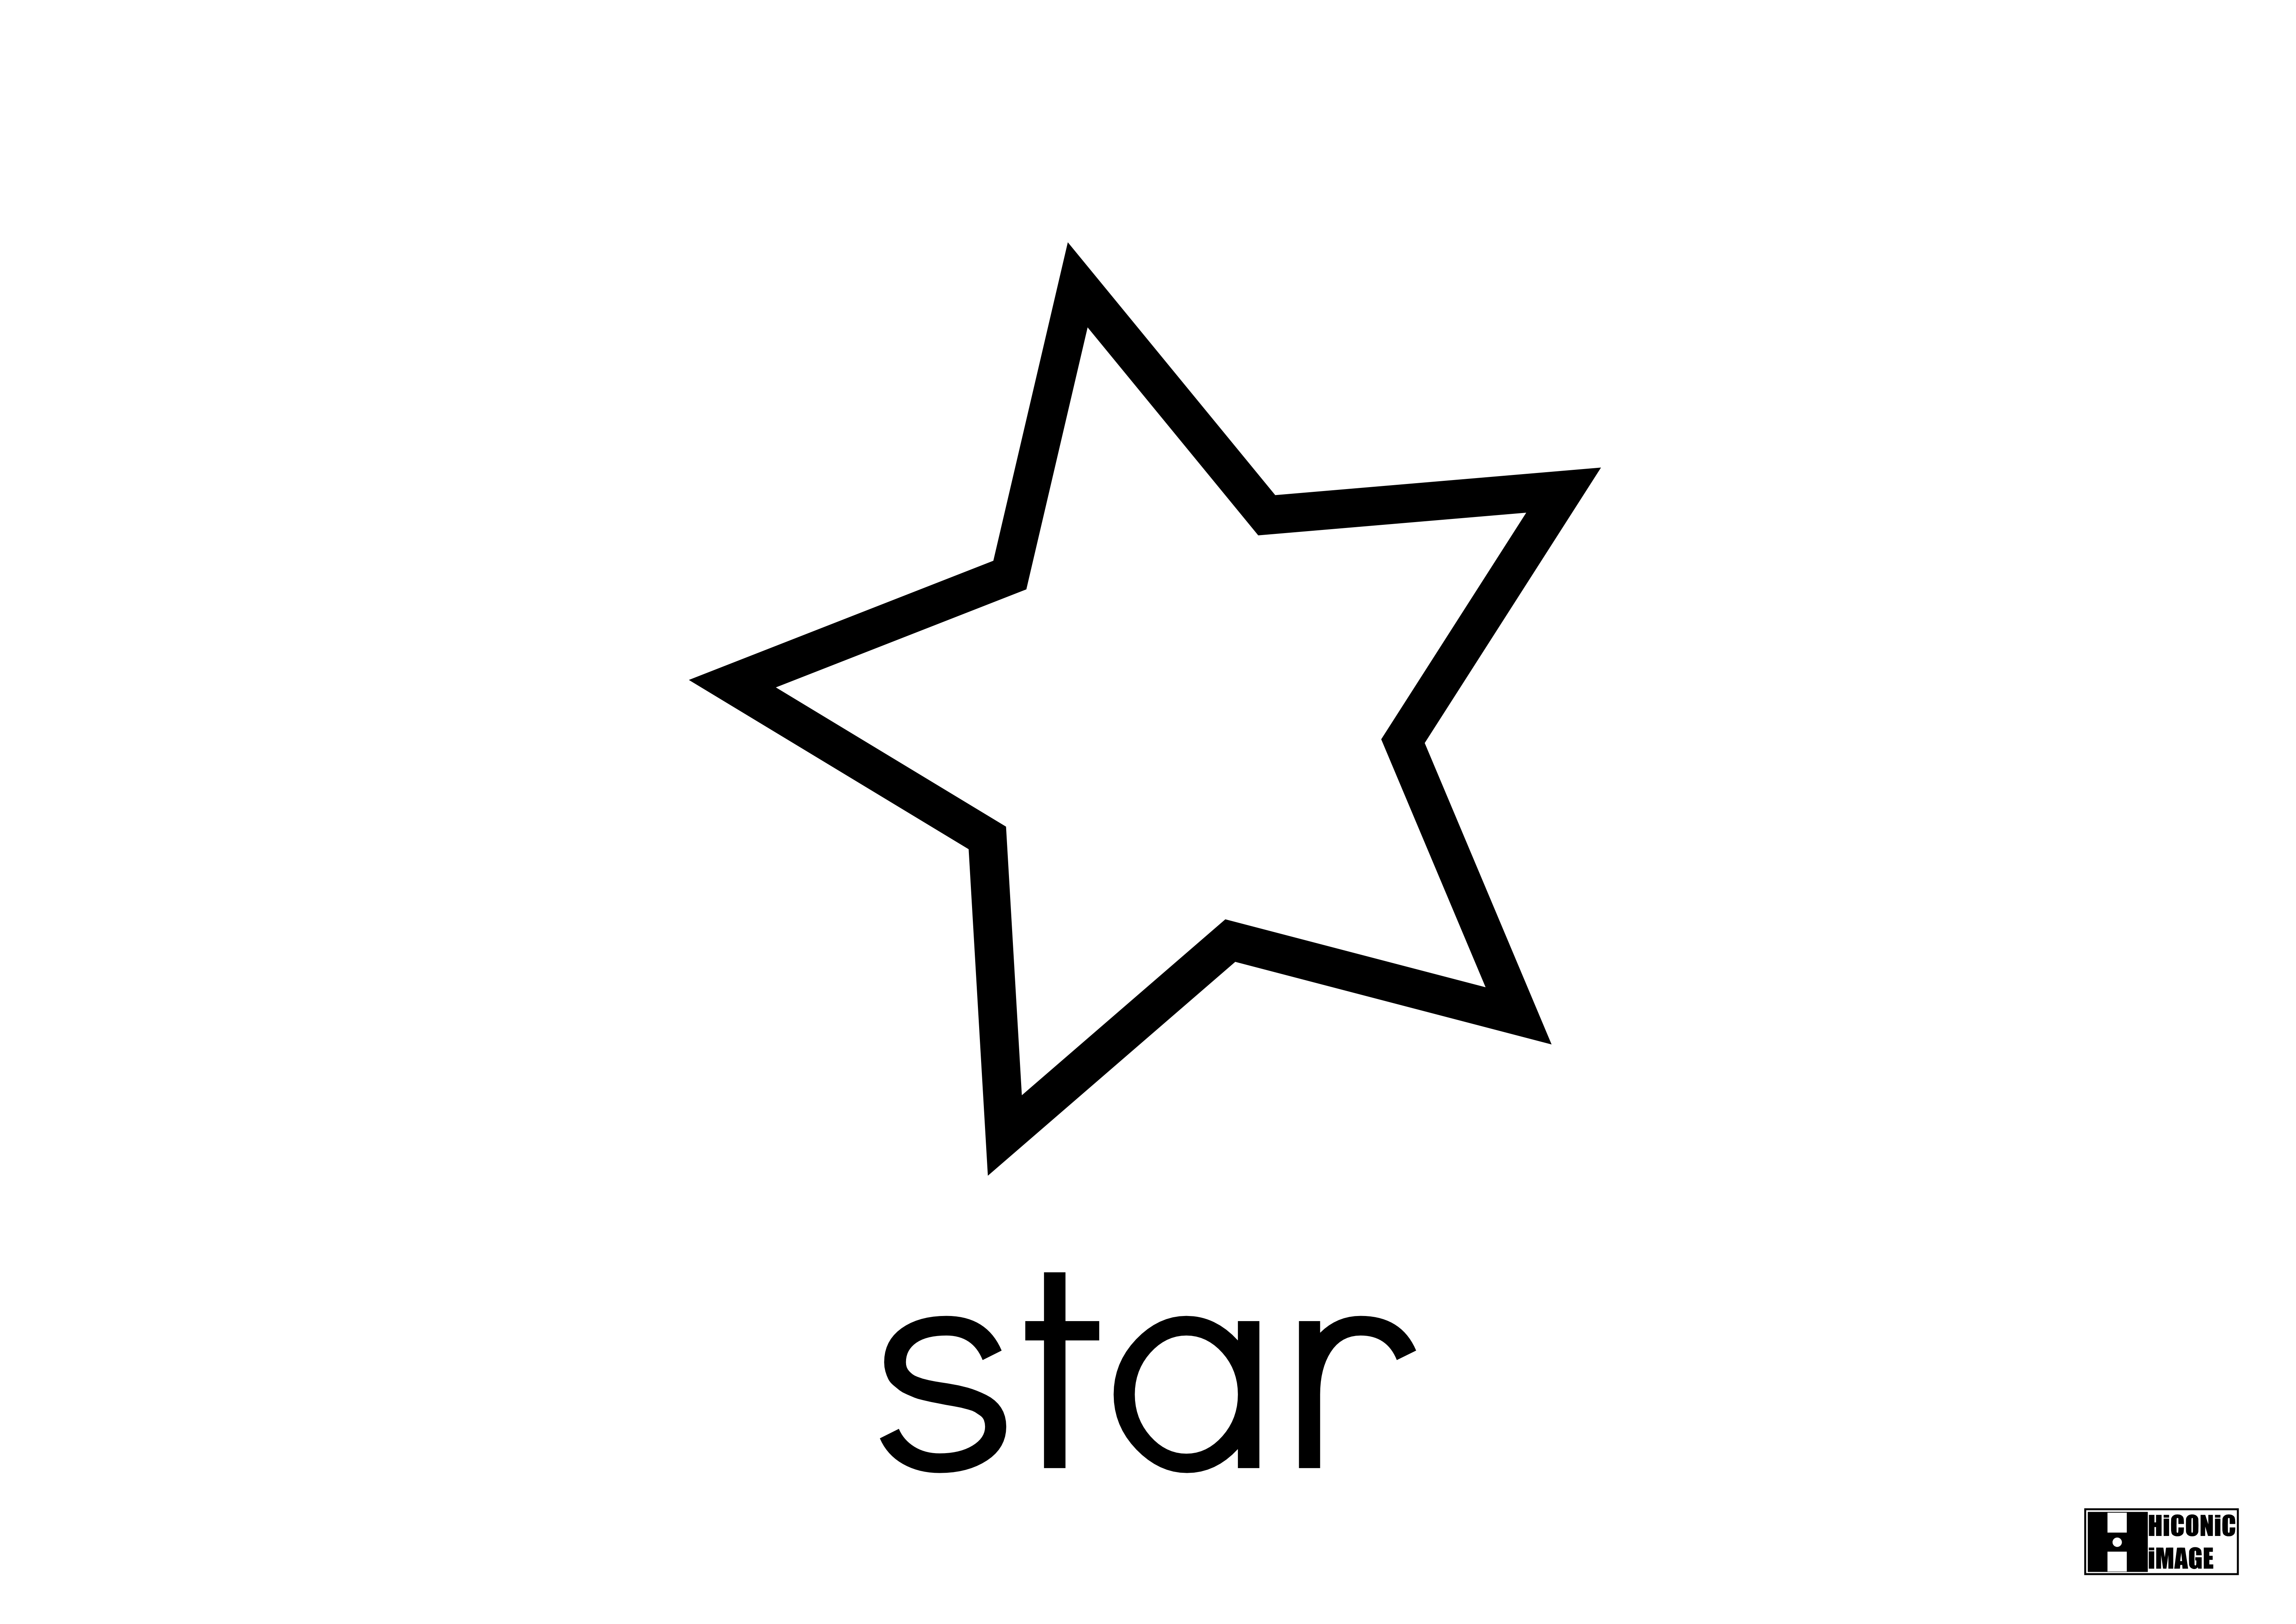 Pictures Of Star Shapes - ClipArt Best